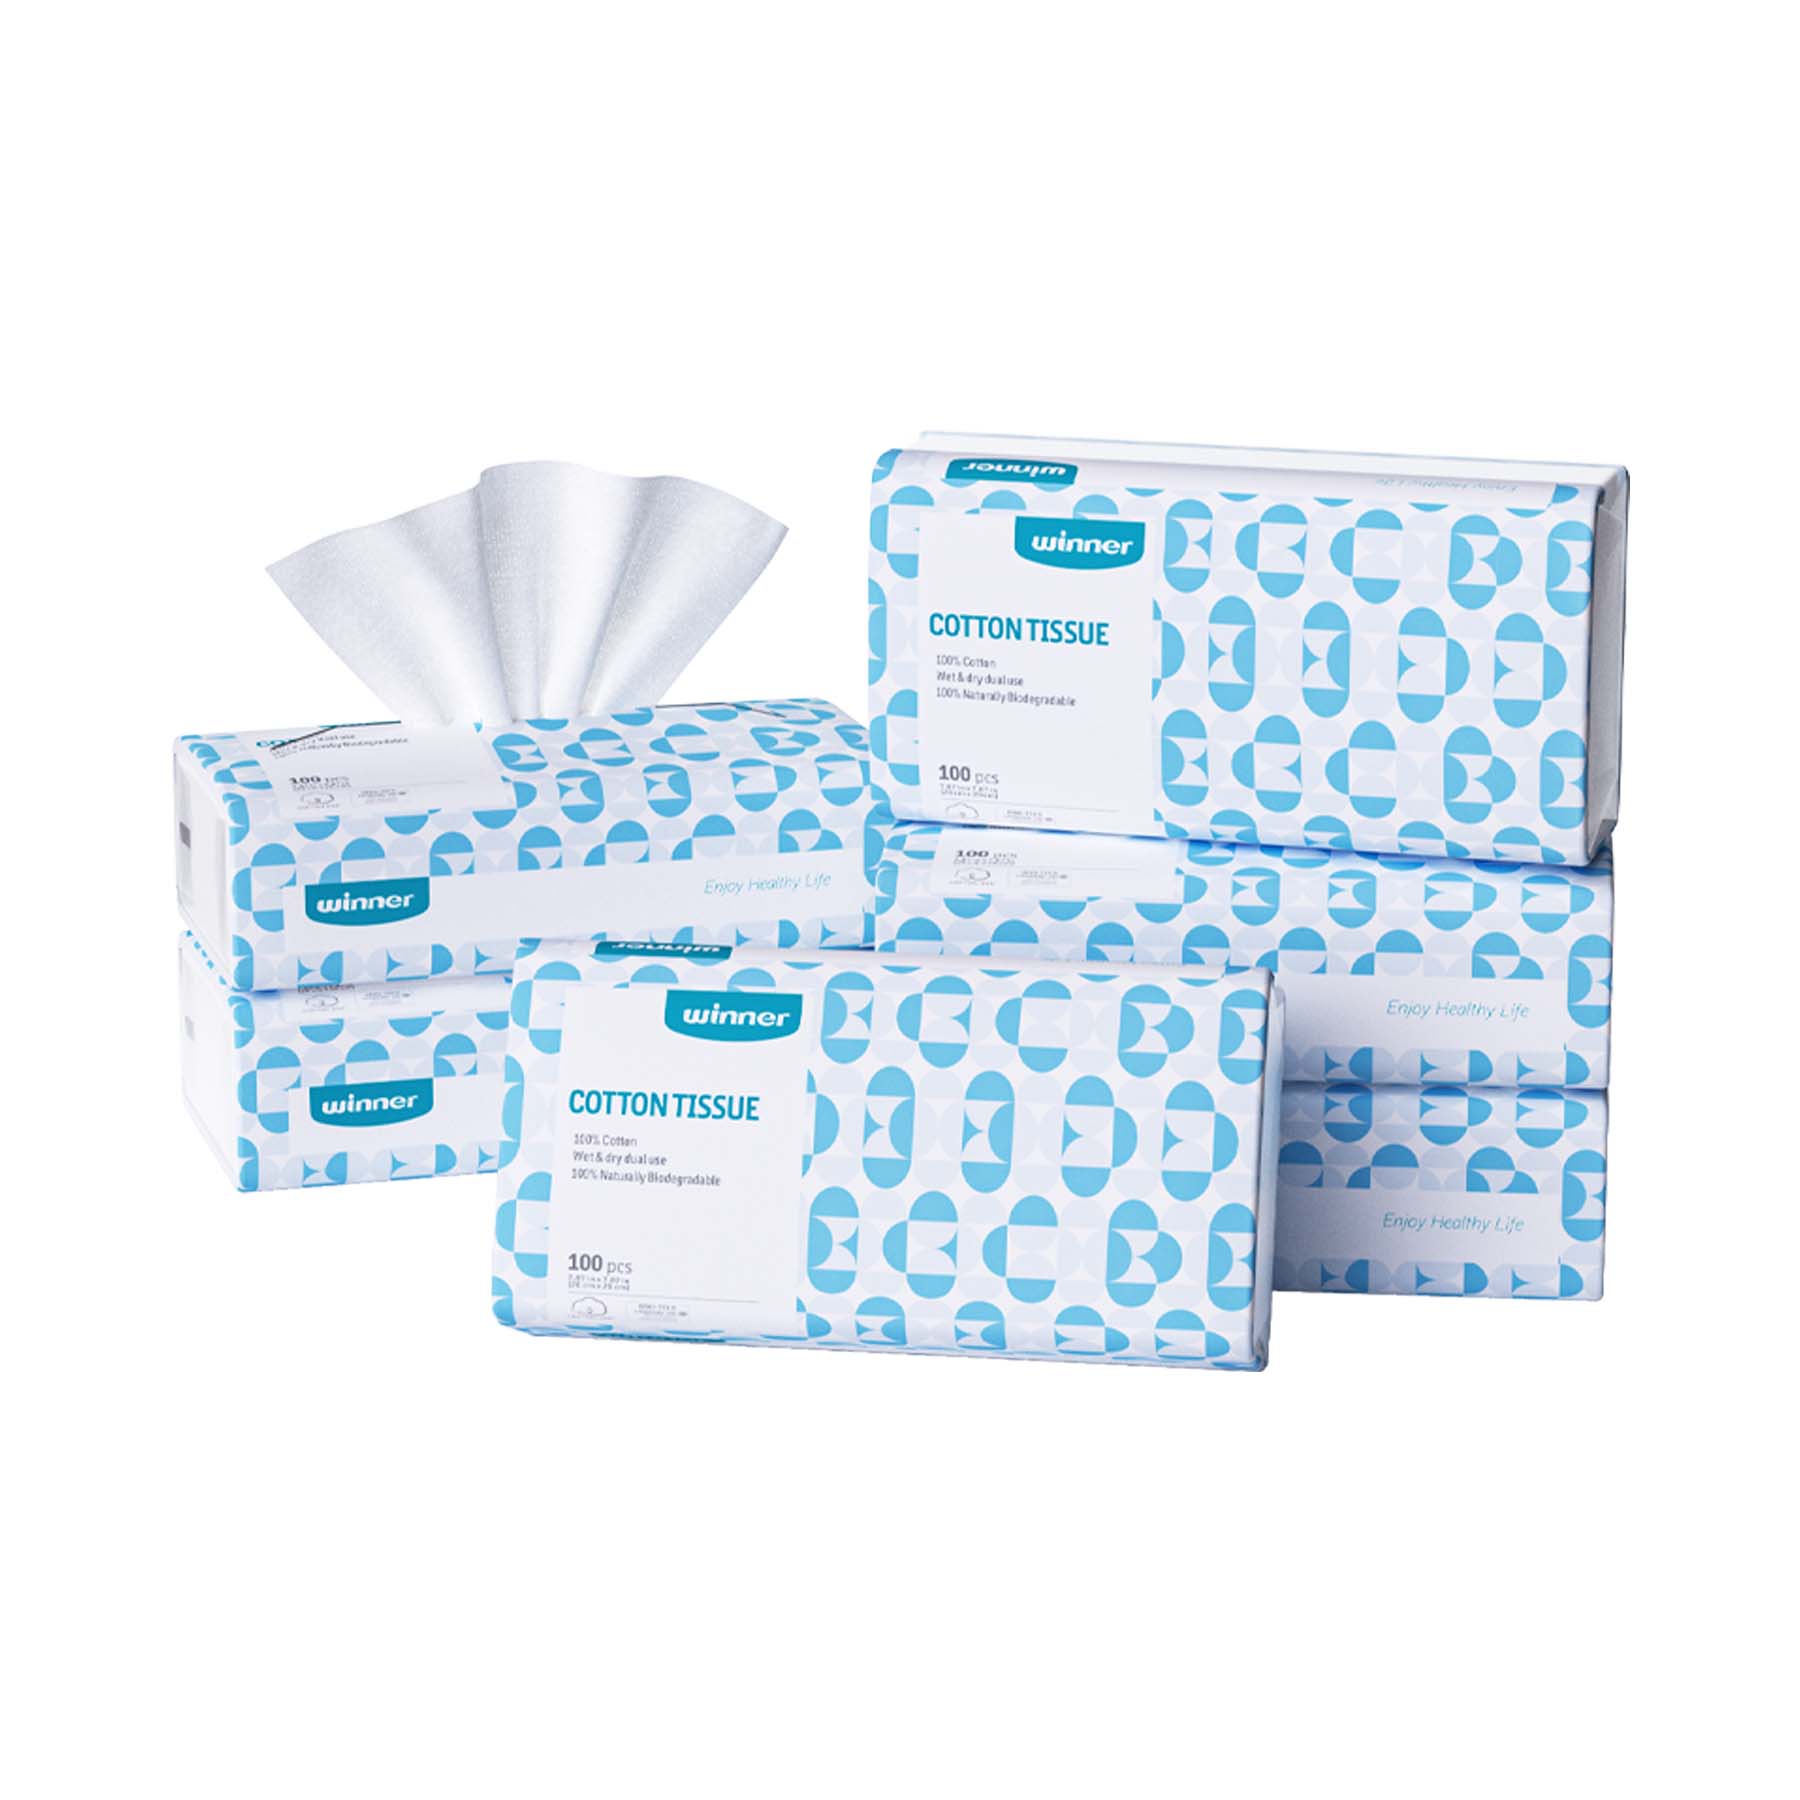 Winner 100% Cotton Dry Wipes, Softness, Use for Daily Cleaning and Face Care